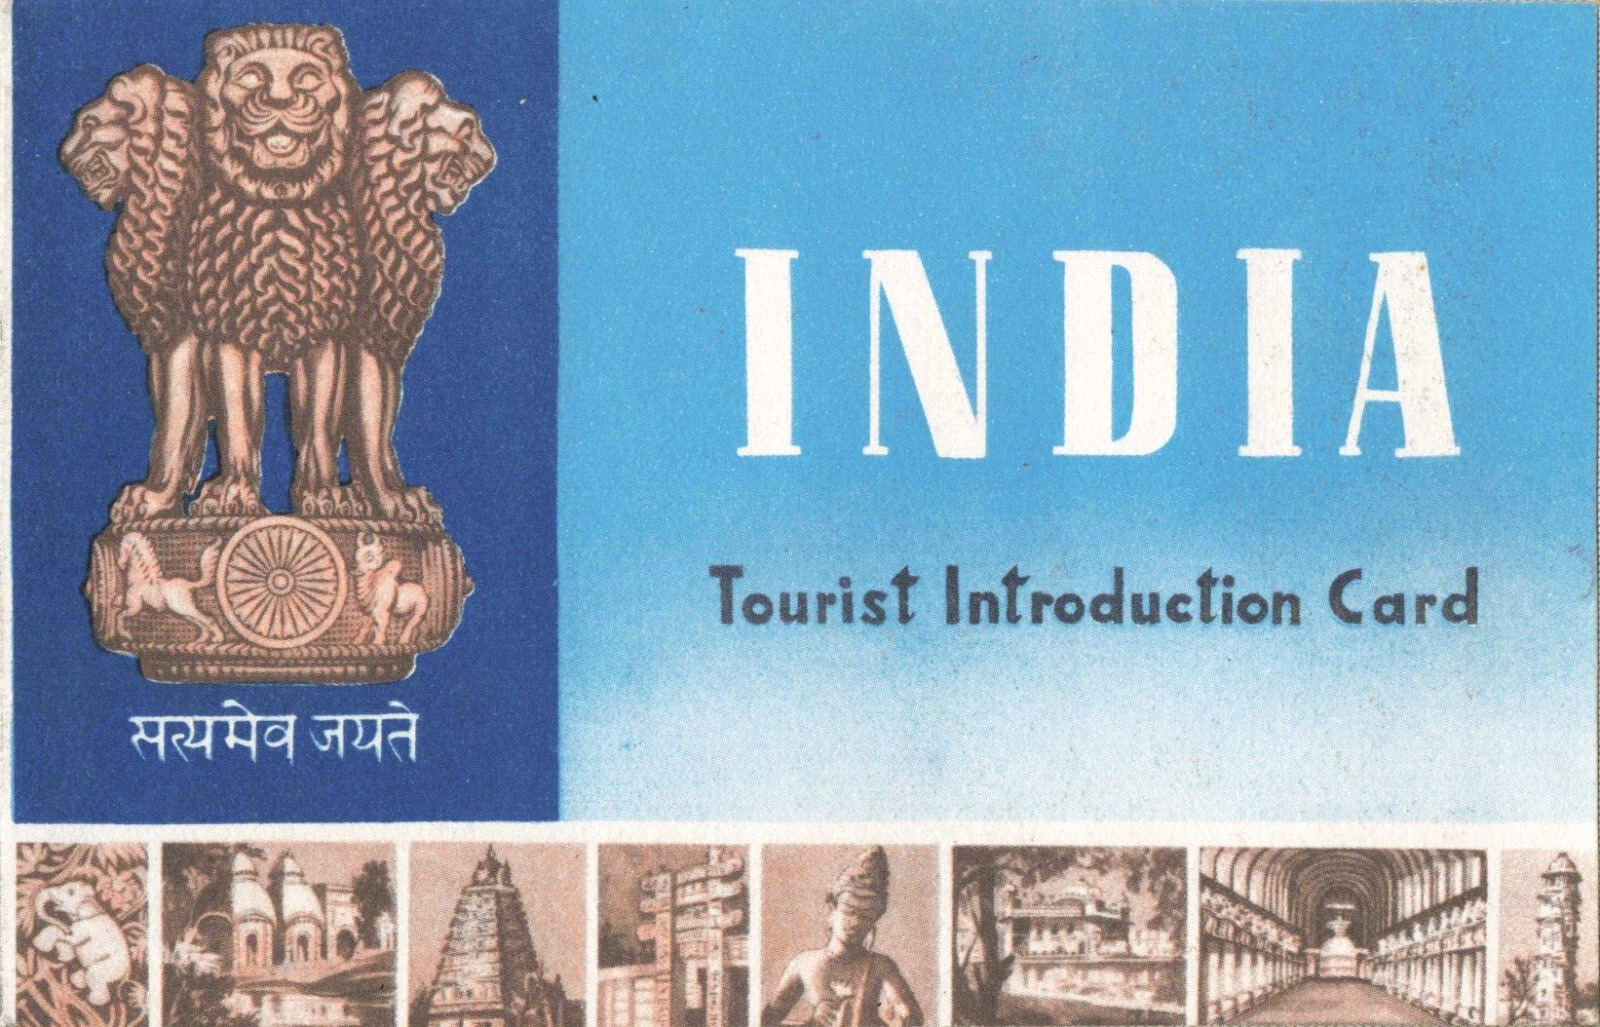 India Tourist Introduction Card Letter of Introduction Consulate New York P054